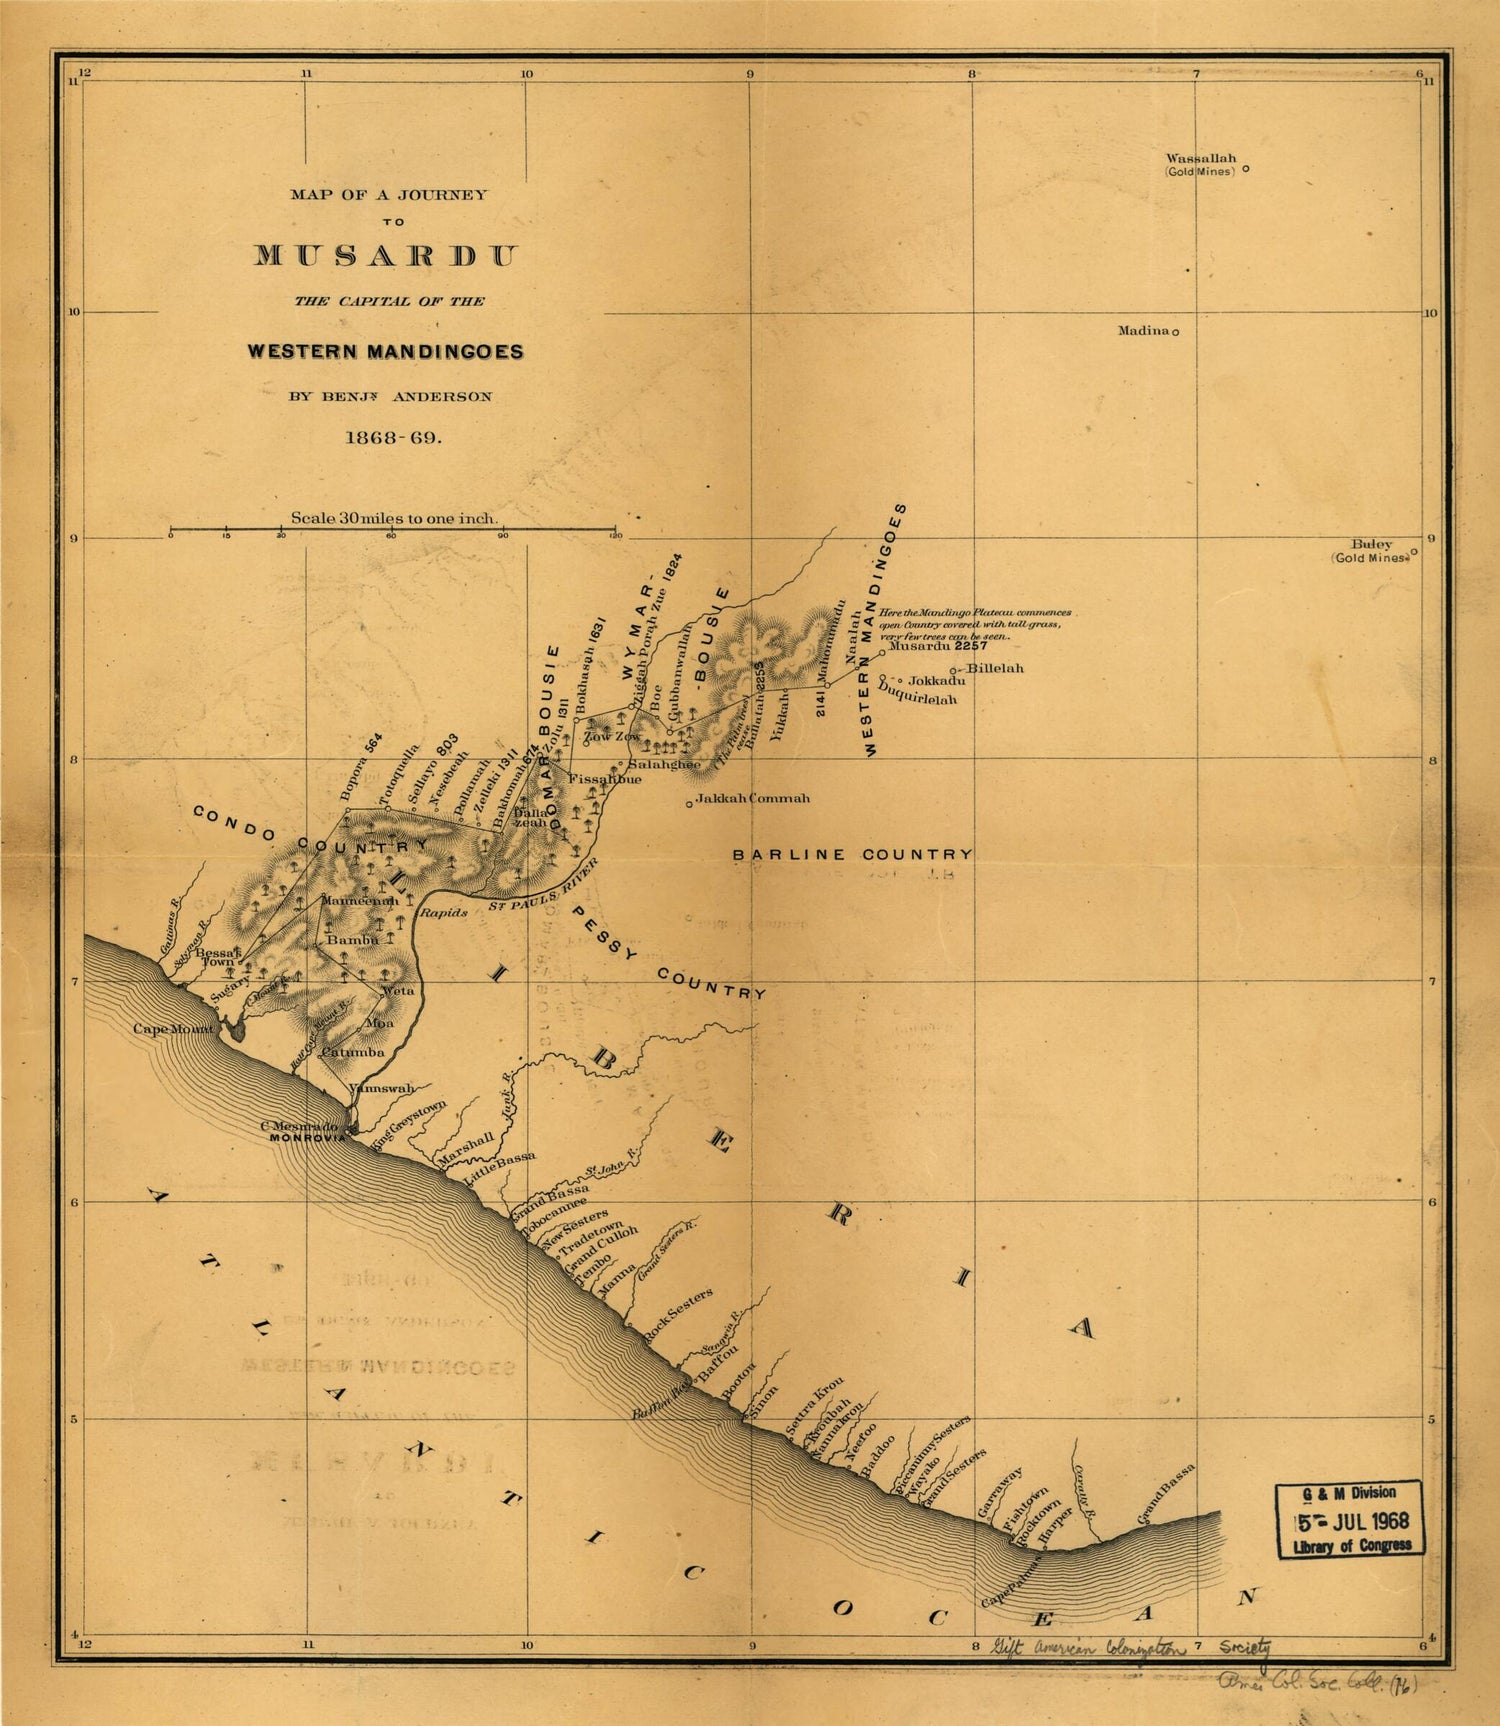 This old map of Map of a Journey to Musardu, the Capital of the Western Mandingoes from 1869 was created by Benjamin J. K. Anderson in 1869